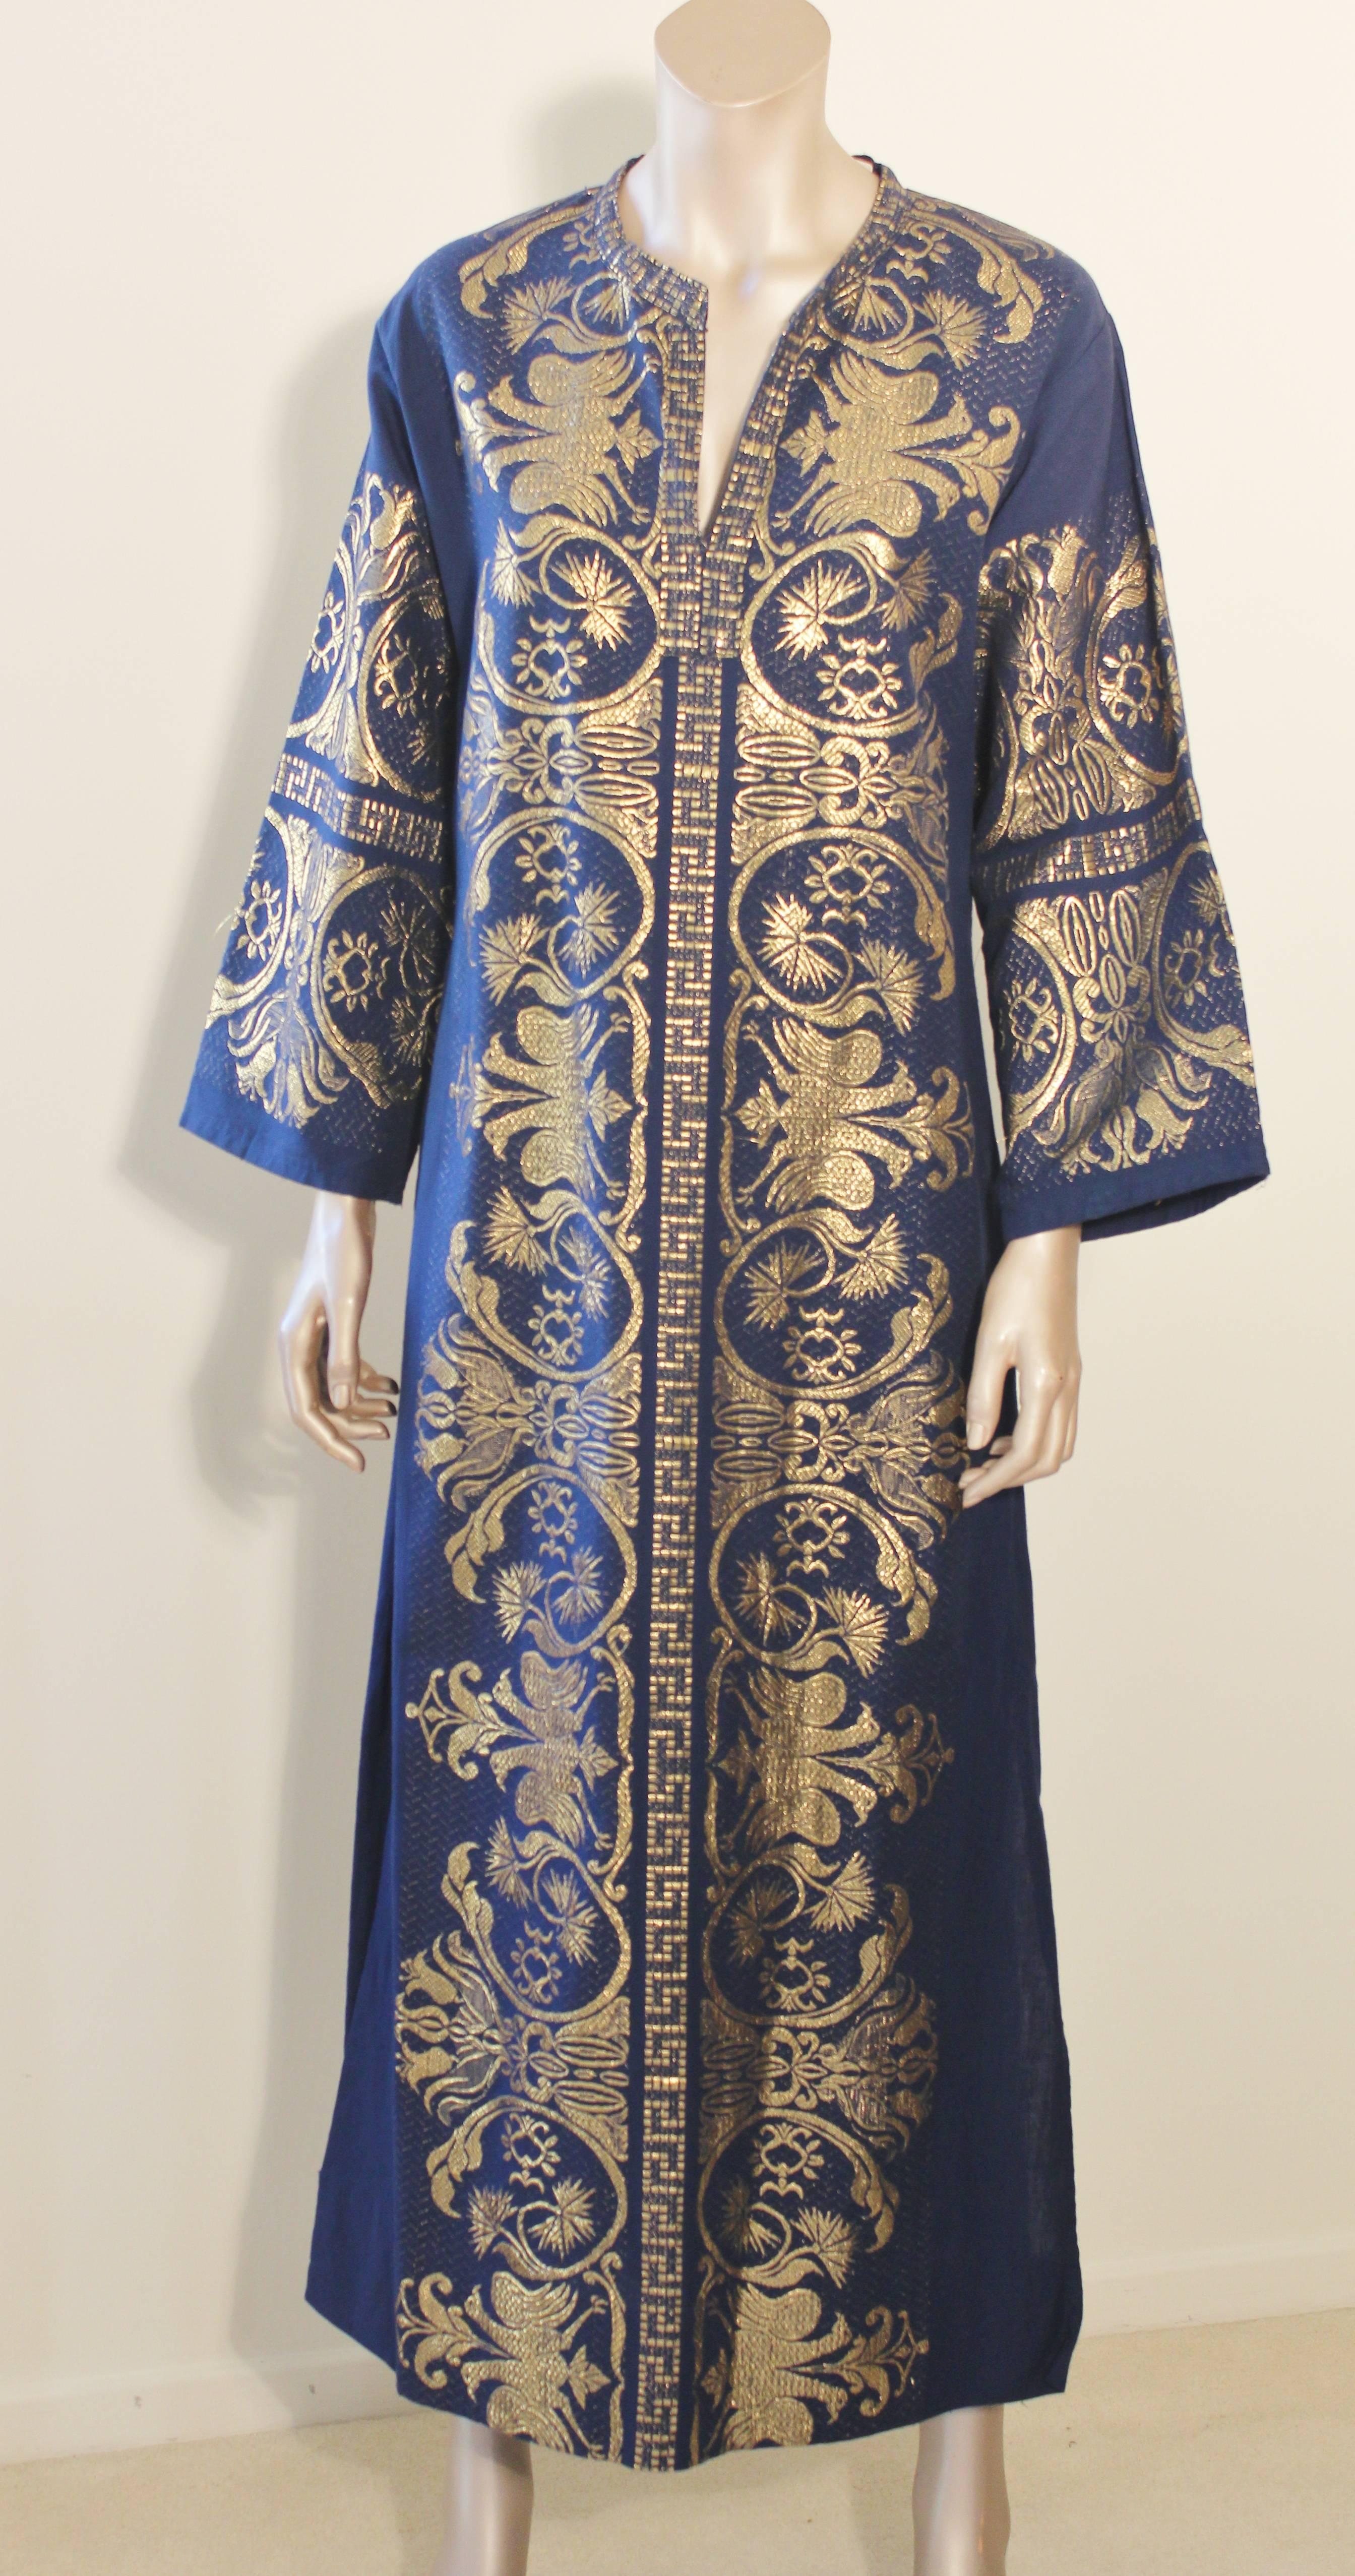 Vintage 1970s black cotton and gold brocade embroidered caftan maxi dress.
Long sleeves.
Absolutely beautiful Boho Kaftan made in Greece by Sigoura.
Rich golden metallic detailing all-over.
Moroccan Bohemian, Yves Saint Laurent style.
Professionally